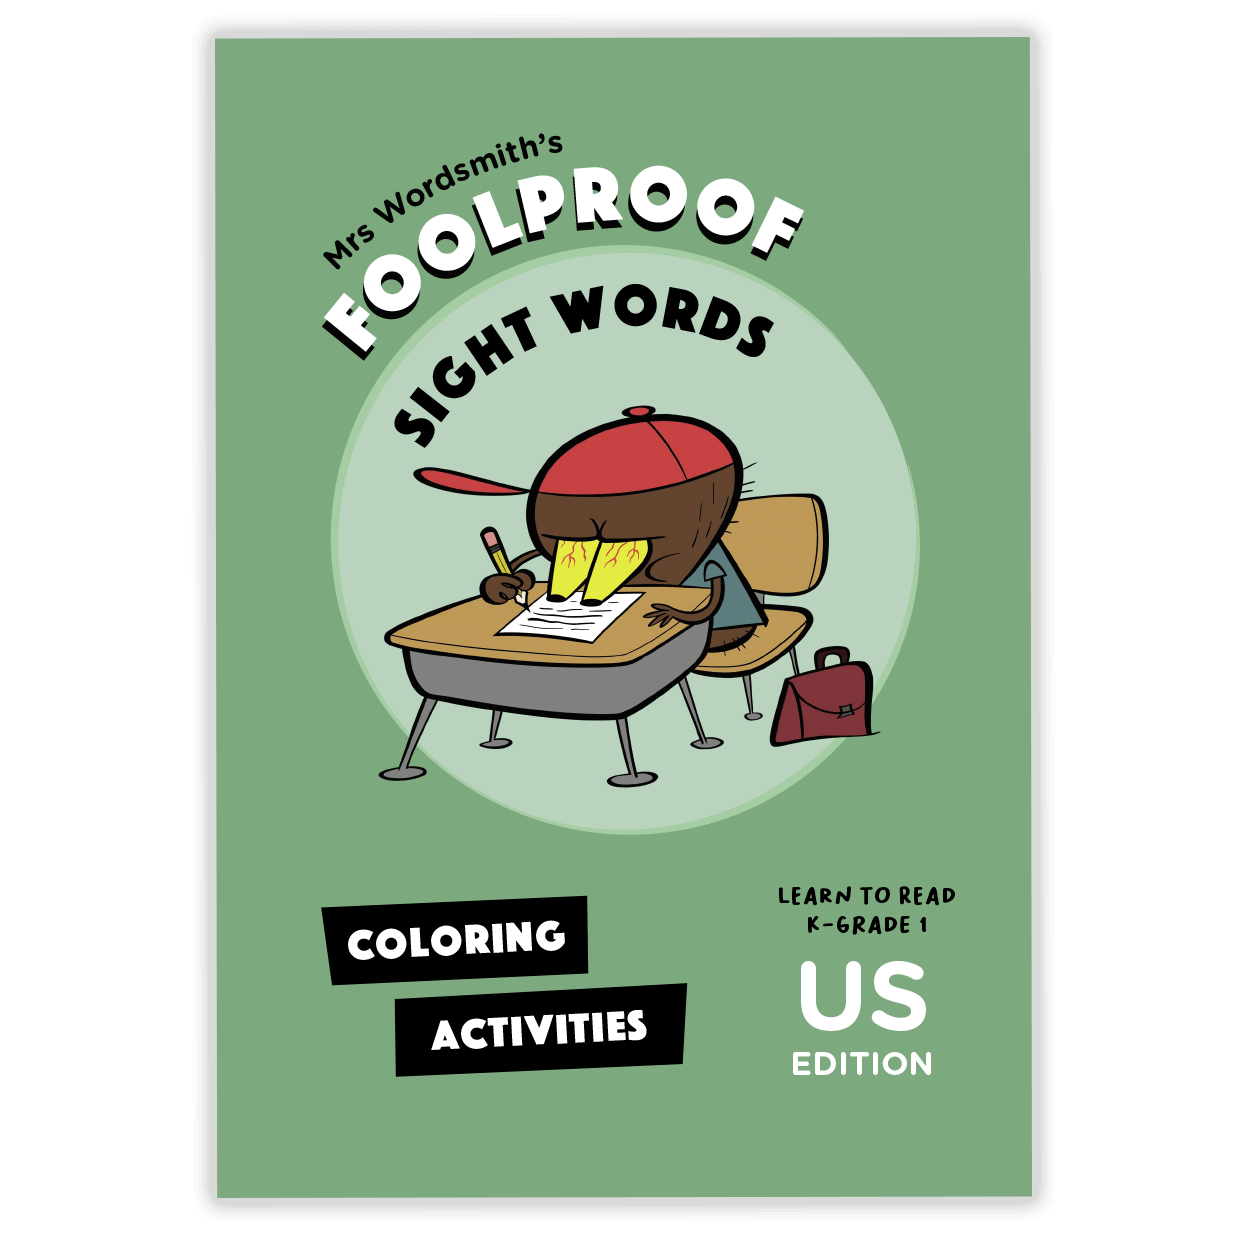 mrs-wordsmith-s-foolproof-sight-words-for-k-grade-1-mrs-wordsmith-us